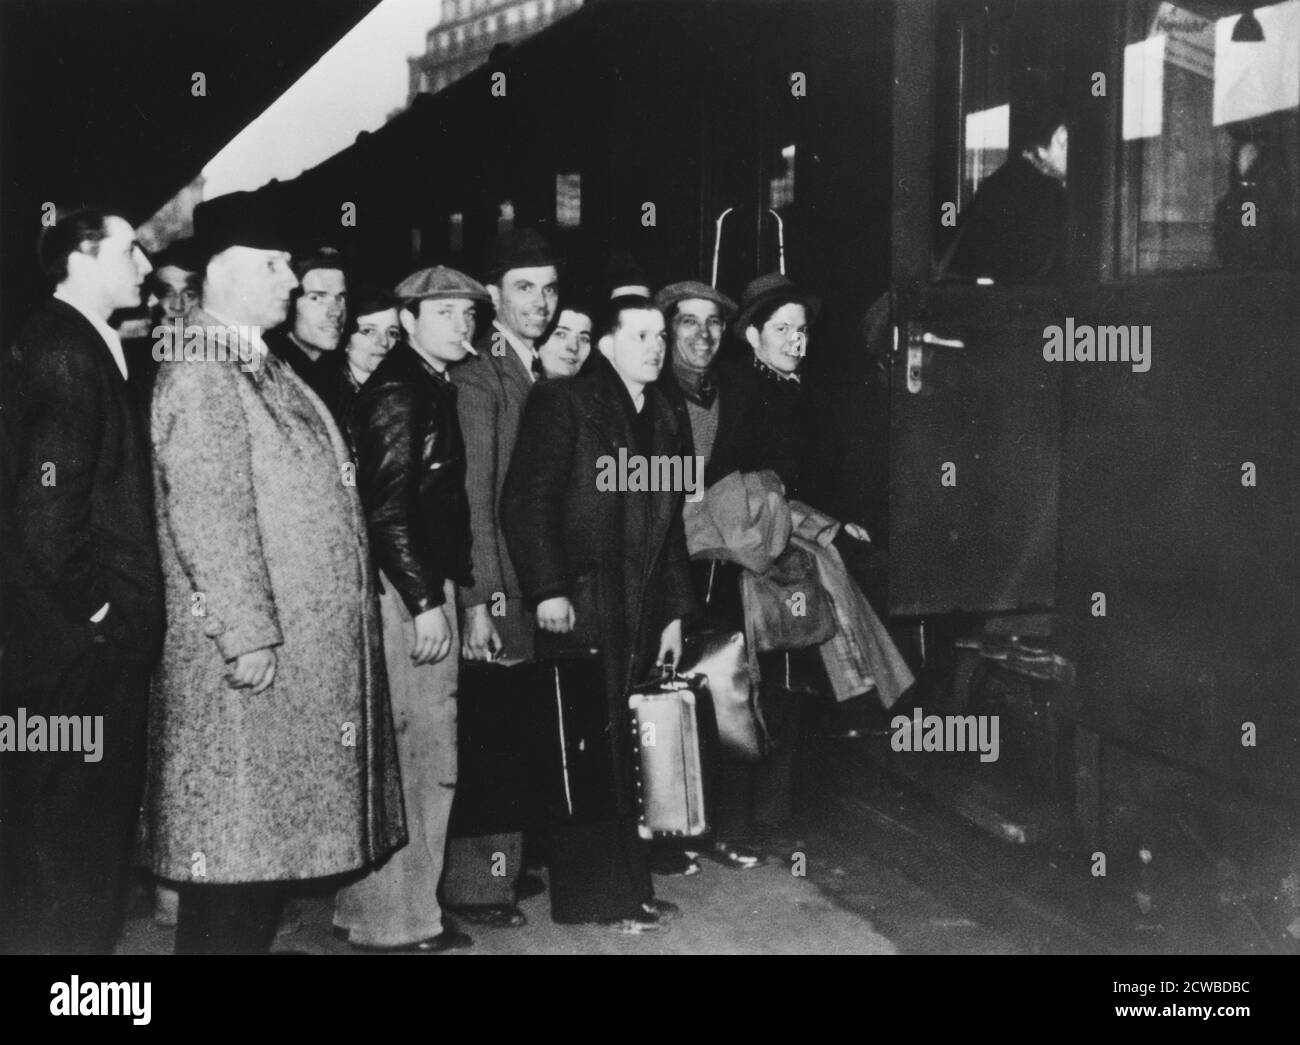 French conscript labour departing for Germany for service in the STO, Paris, 1943-1944. Faced with a decline in the supply of forced labour from occupied Poland and Russia, the Nazis demanded that France send 250,000 labourers to Germany by the end of 1942. As an incentive the Germans agreed to repatriate one French prisoner of war for every three volunteer labourers. But the volunteer numbers were insufficient and a form of conscription, the Service du Travail Obligatoire (STO) had to be introduced. By the time France was liberated an estimated 650,000 men and 44,000 women had been sent to wo Stock Photo